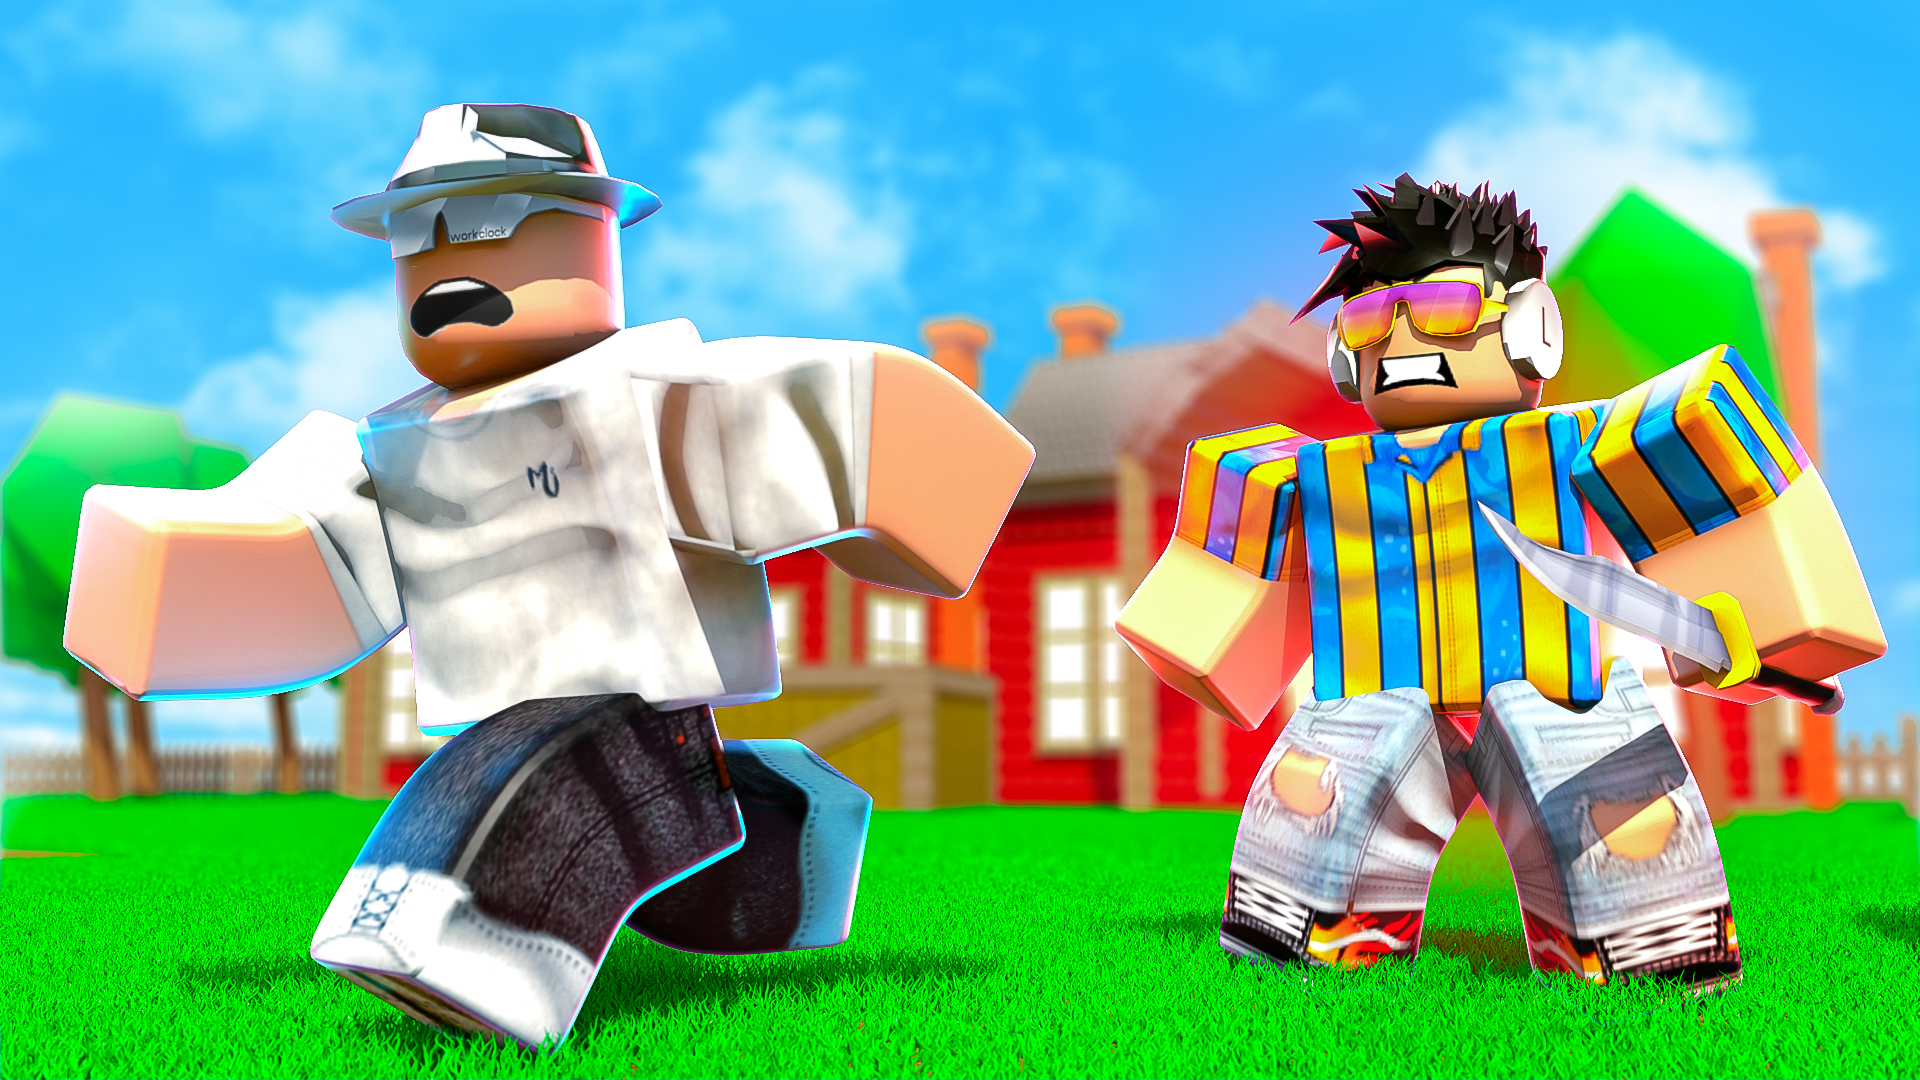 Flerno On Twitter Commission For Murder Mystery 50 Like Rts Are Appreciated Roblox Robloxdev Robloxgfx Softgb Rightiess - roblox oh noes hat